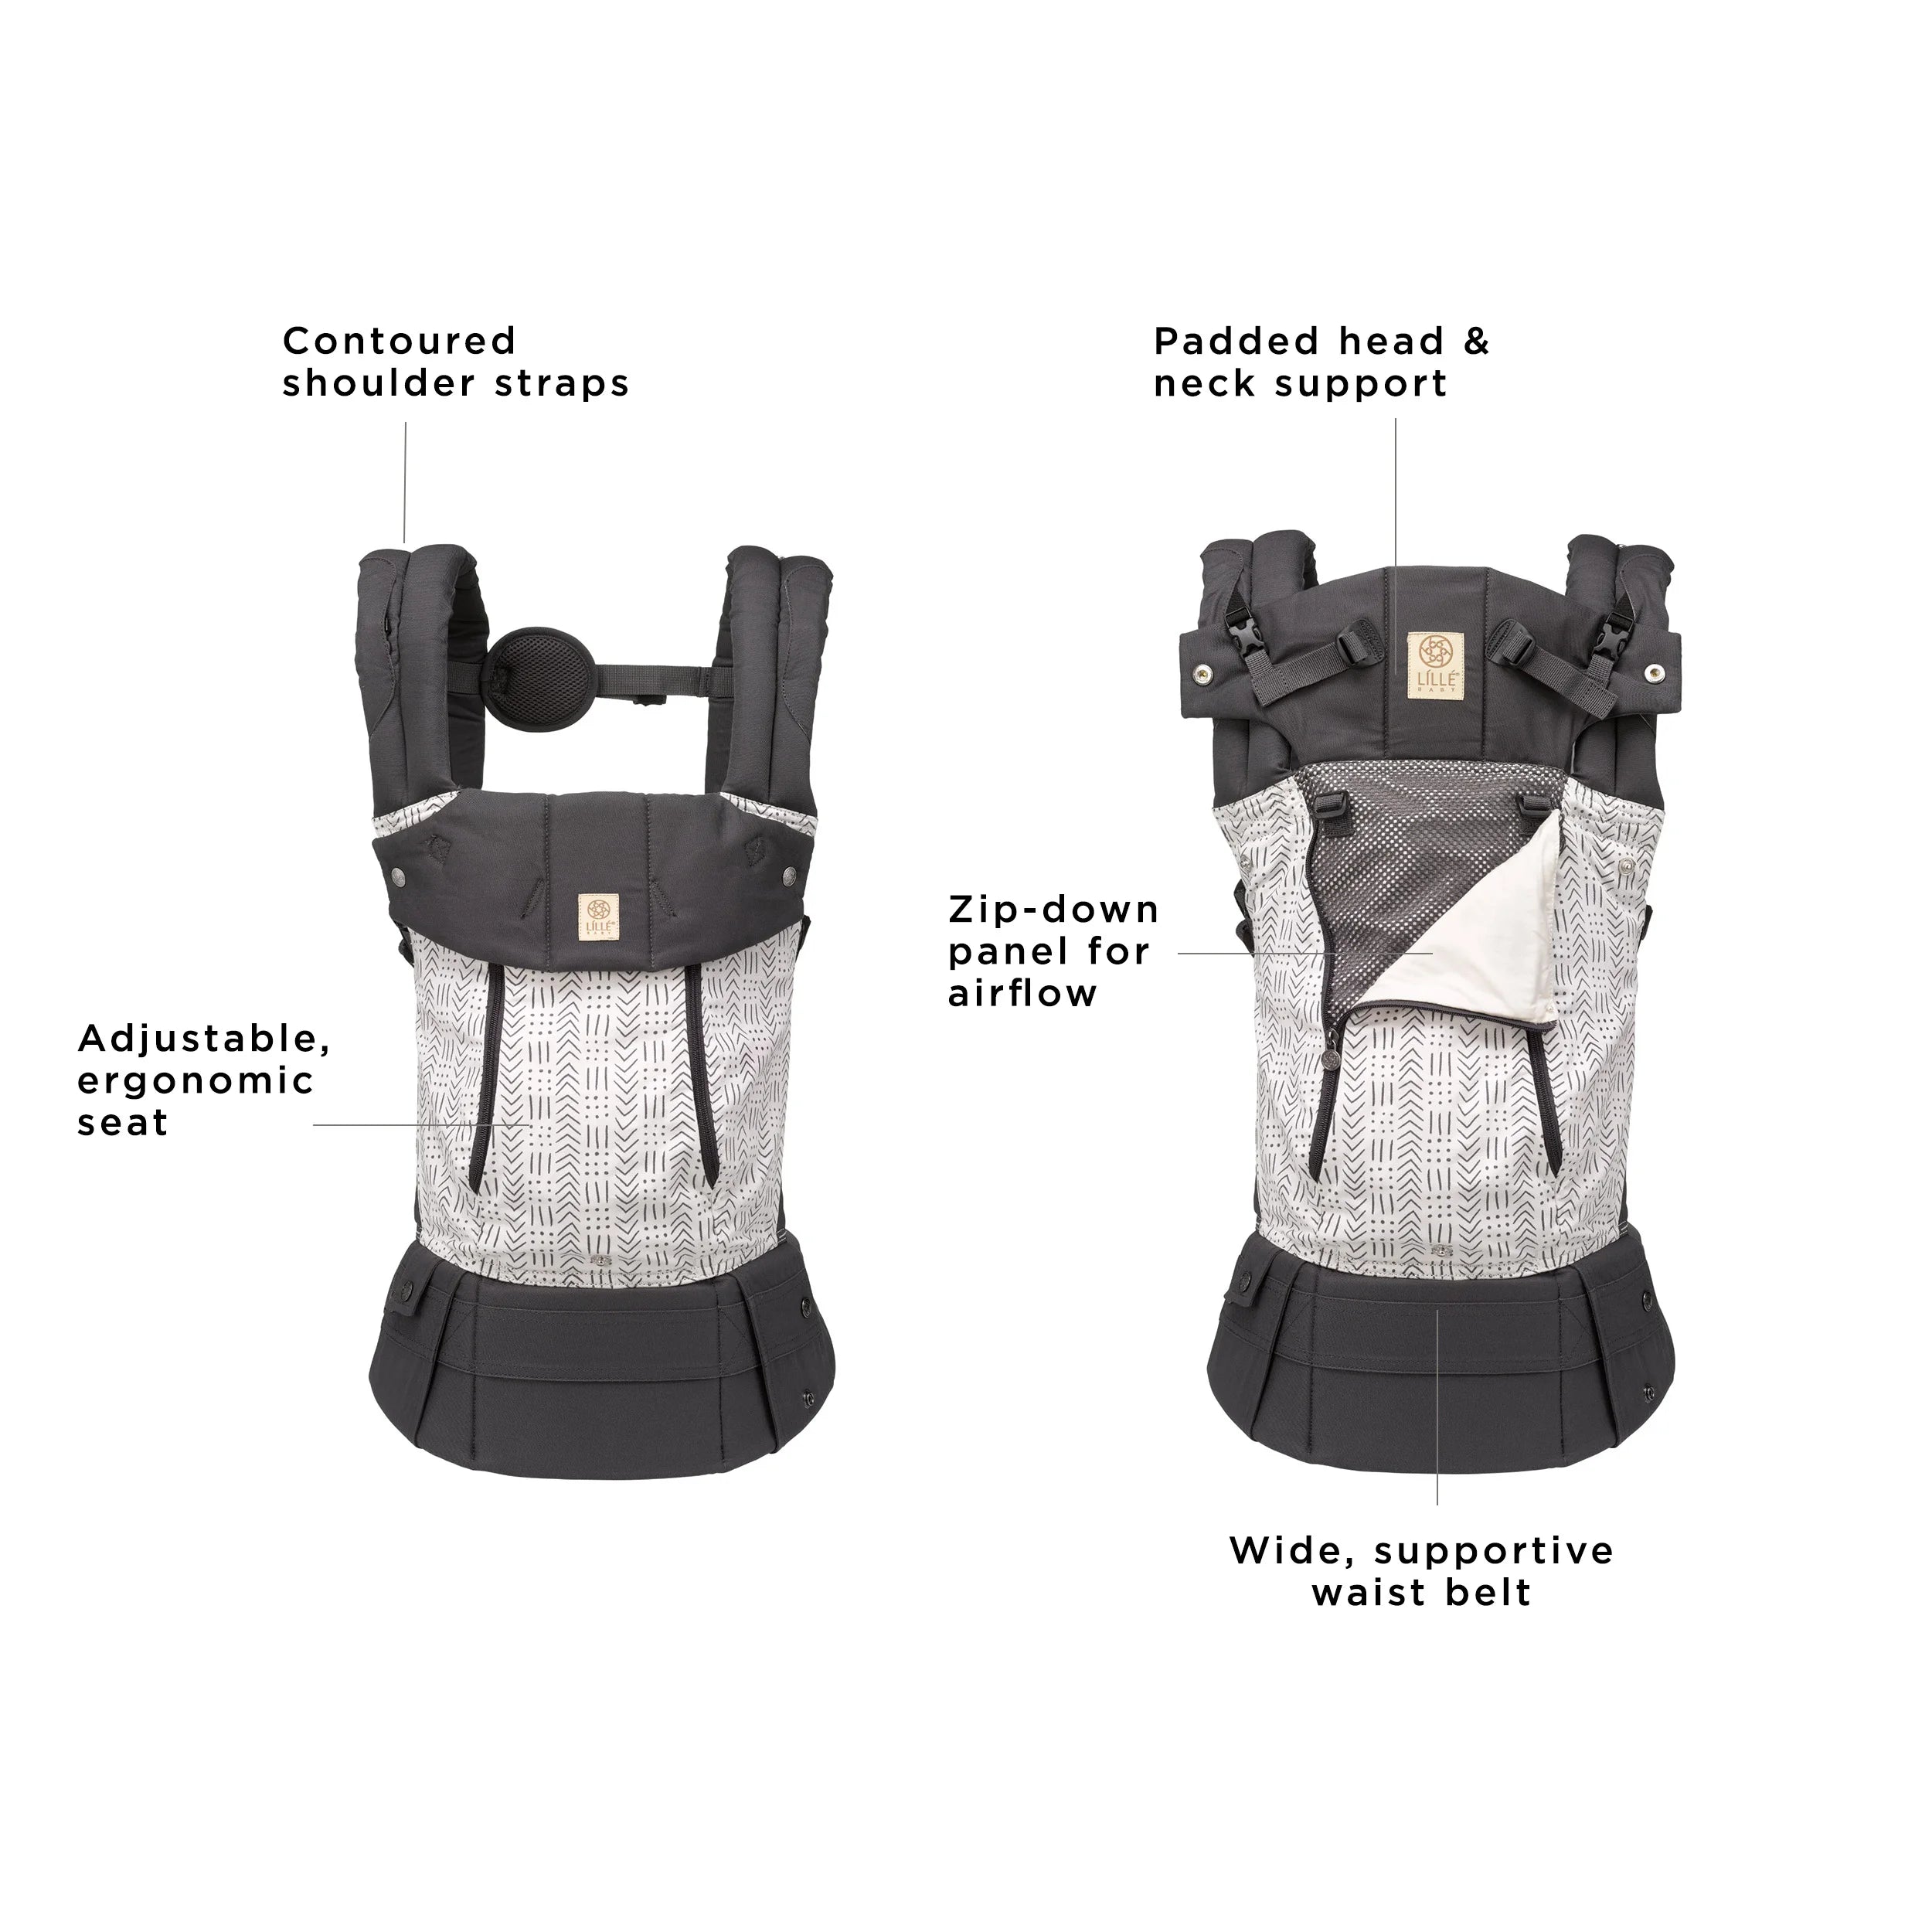 complete 6-in-1 all seasons has contoured shoulder straps, adjustable ergonomic seat, padded head & neck support, zip-down panel for airflow, and wide supportive waist belr